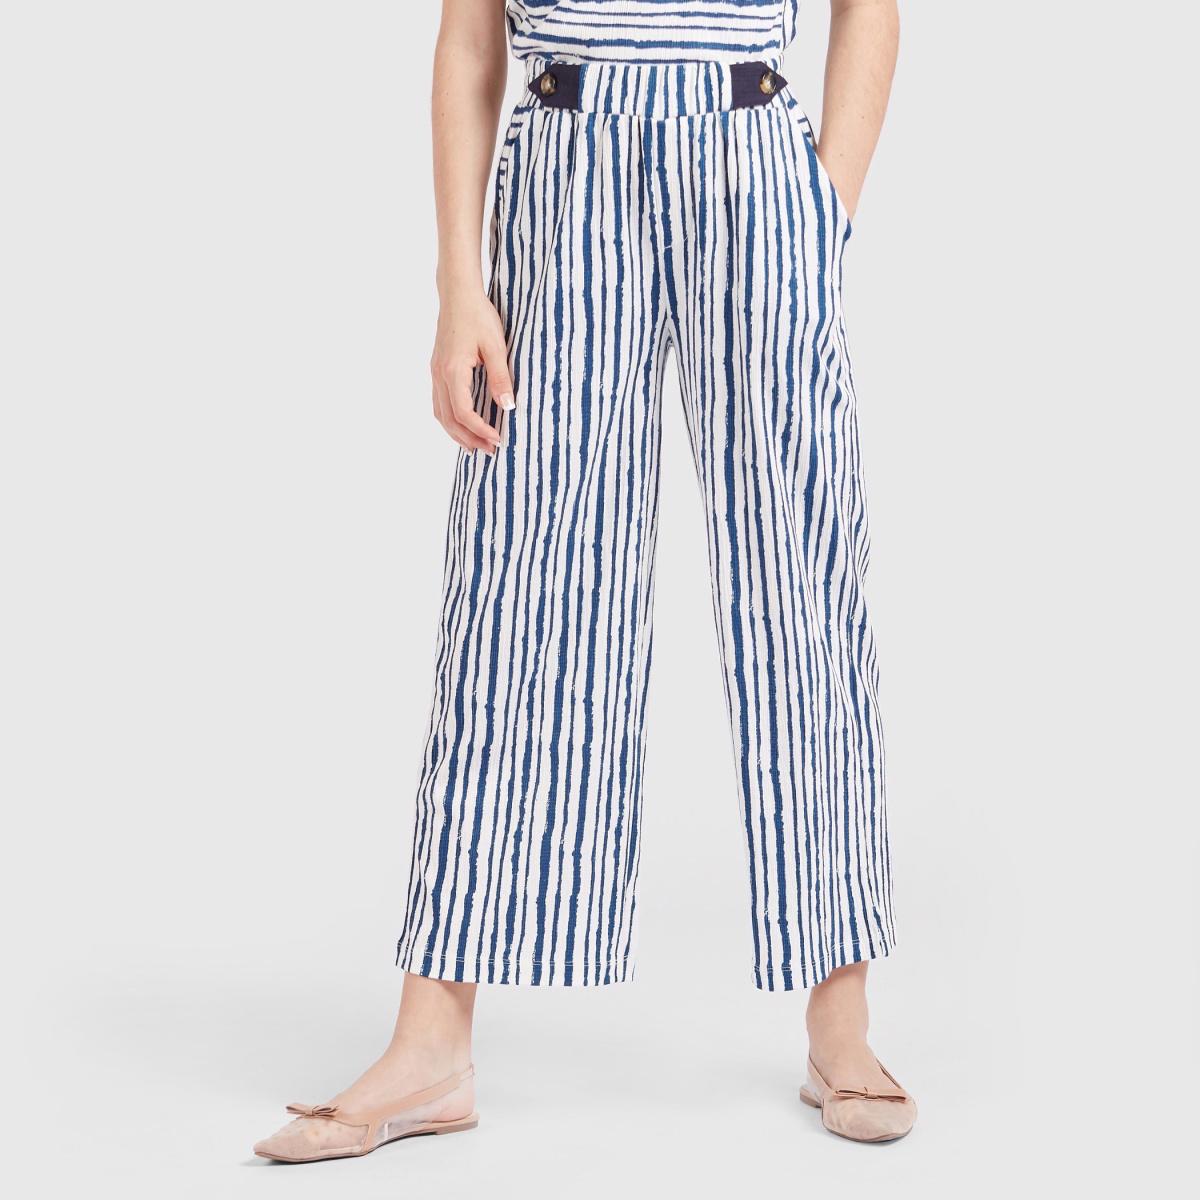 Striped Ankle Length Culottes with Elasticated Waistband